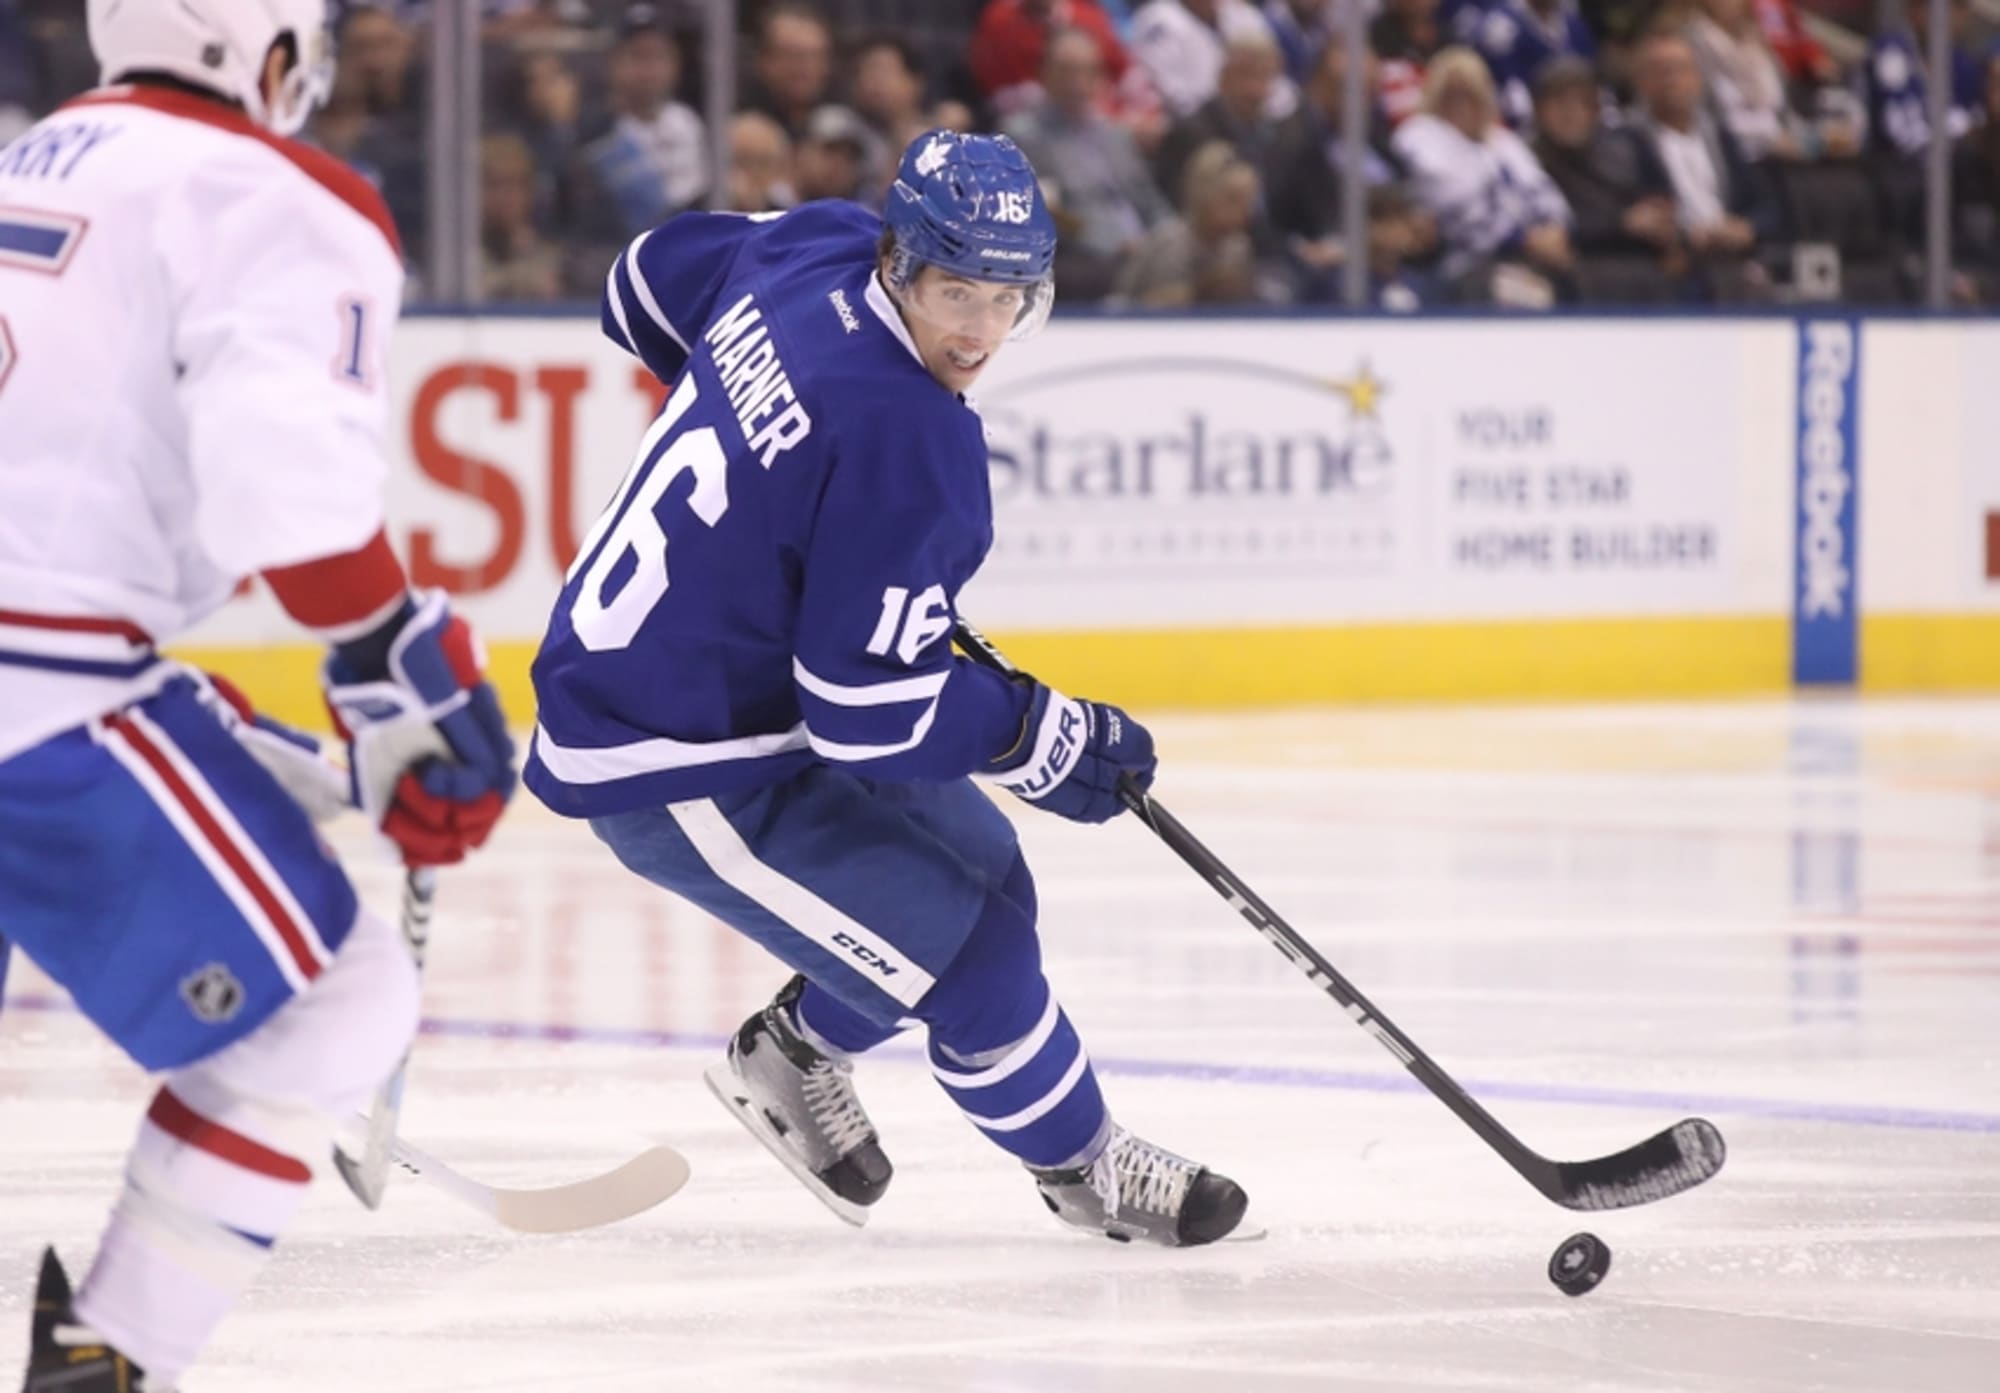 Mitch Marner silencing doubters with career-best season